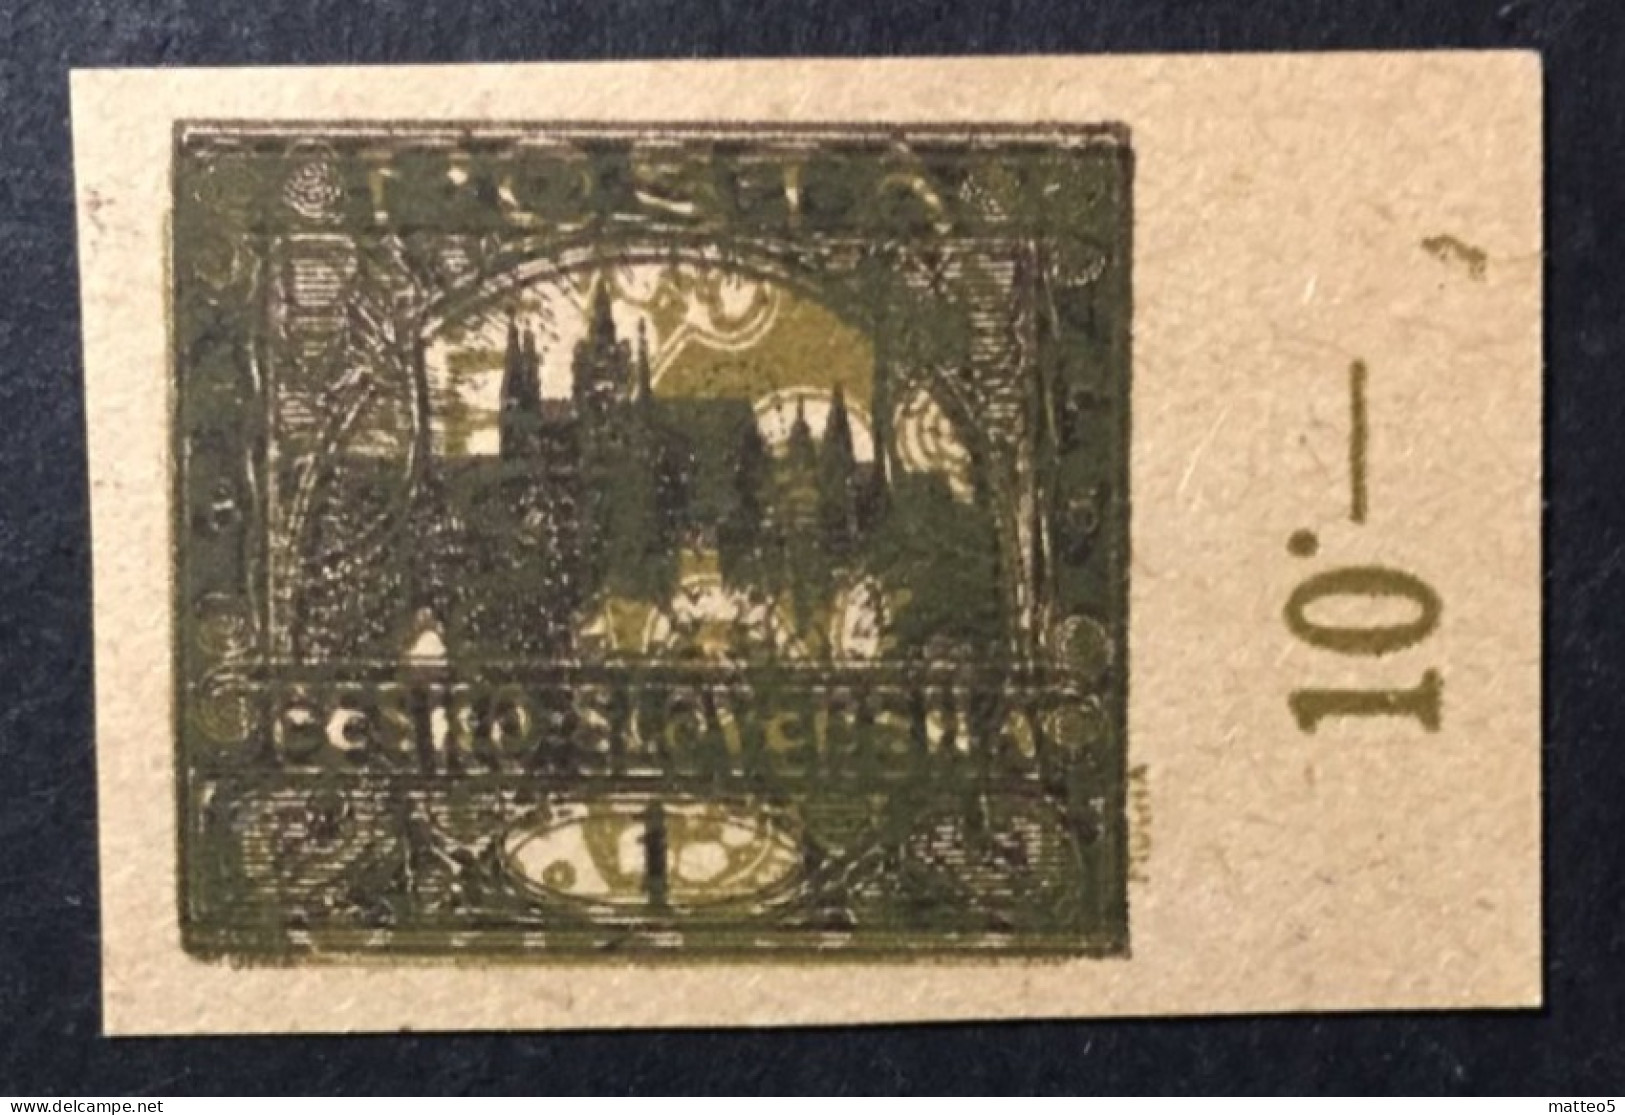 1919  Czechoslovakia - Hradcany At Castle- Prague Castle - Variety, Double Color Printing - Unused ( Mint Hinged ) - Unused Stamps